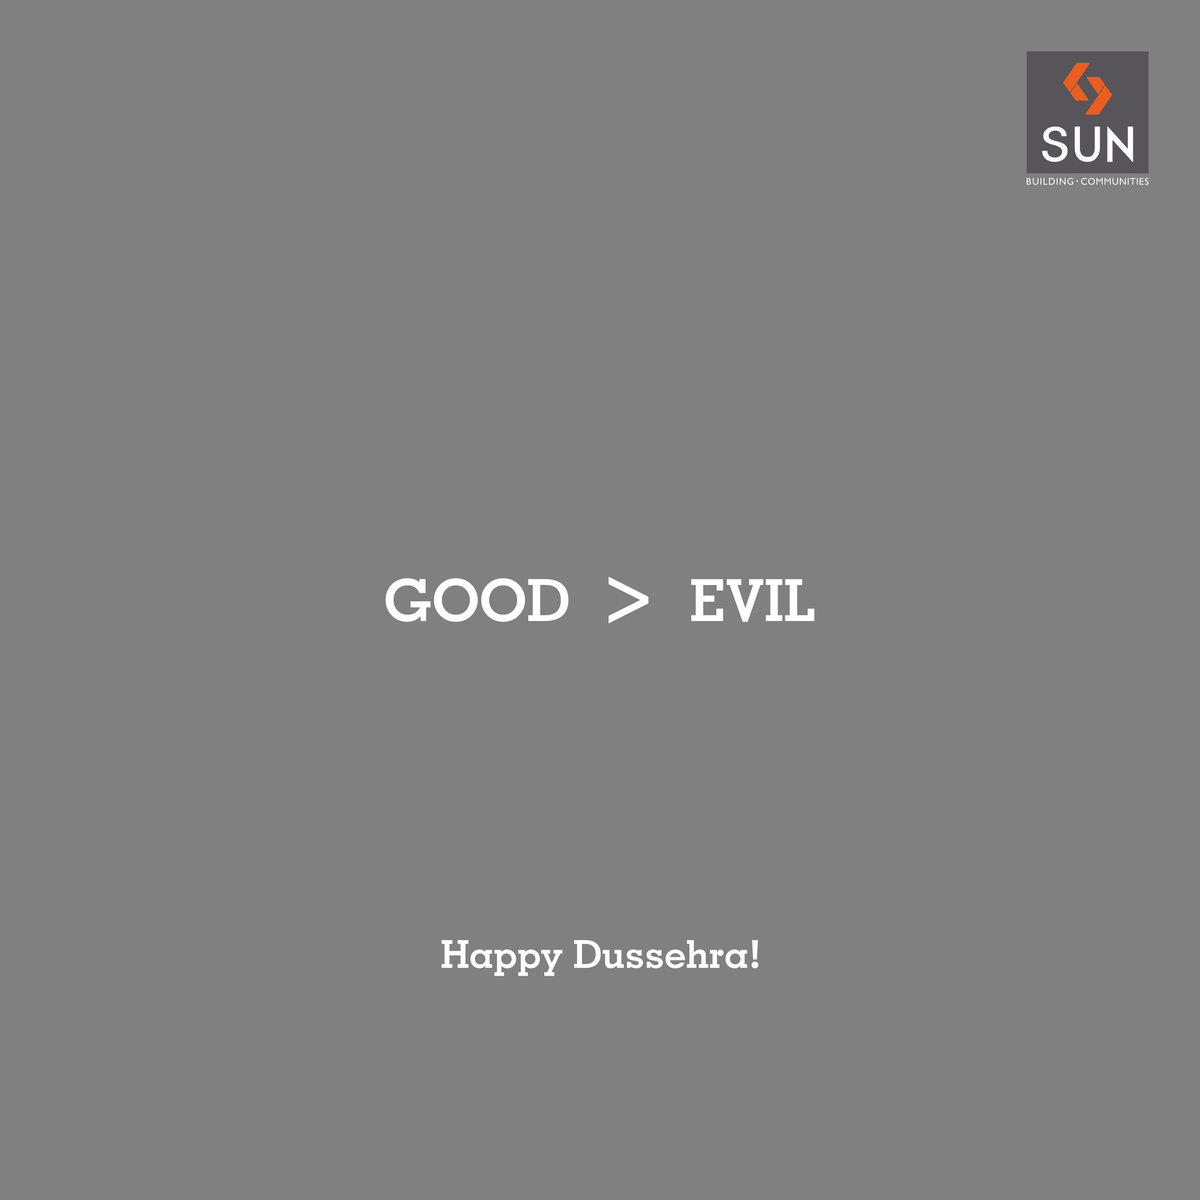 Let’s celebrate an auspicious day to begin new things in life by killing our inner evils. #HappyDussehra! https://t.co/QZ7YJoMJlL